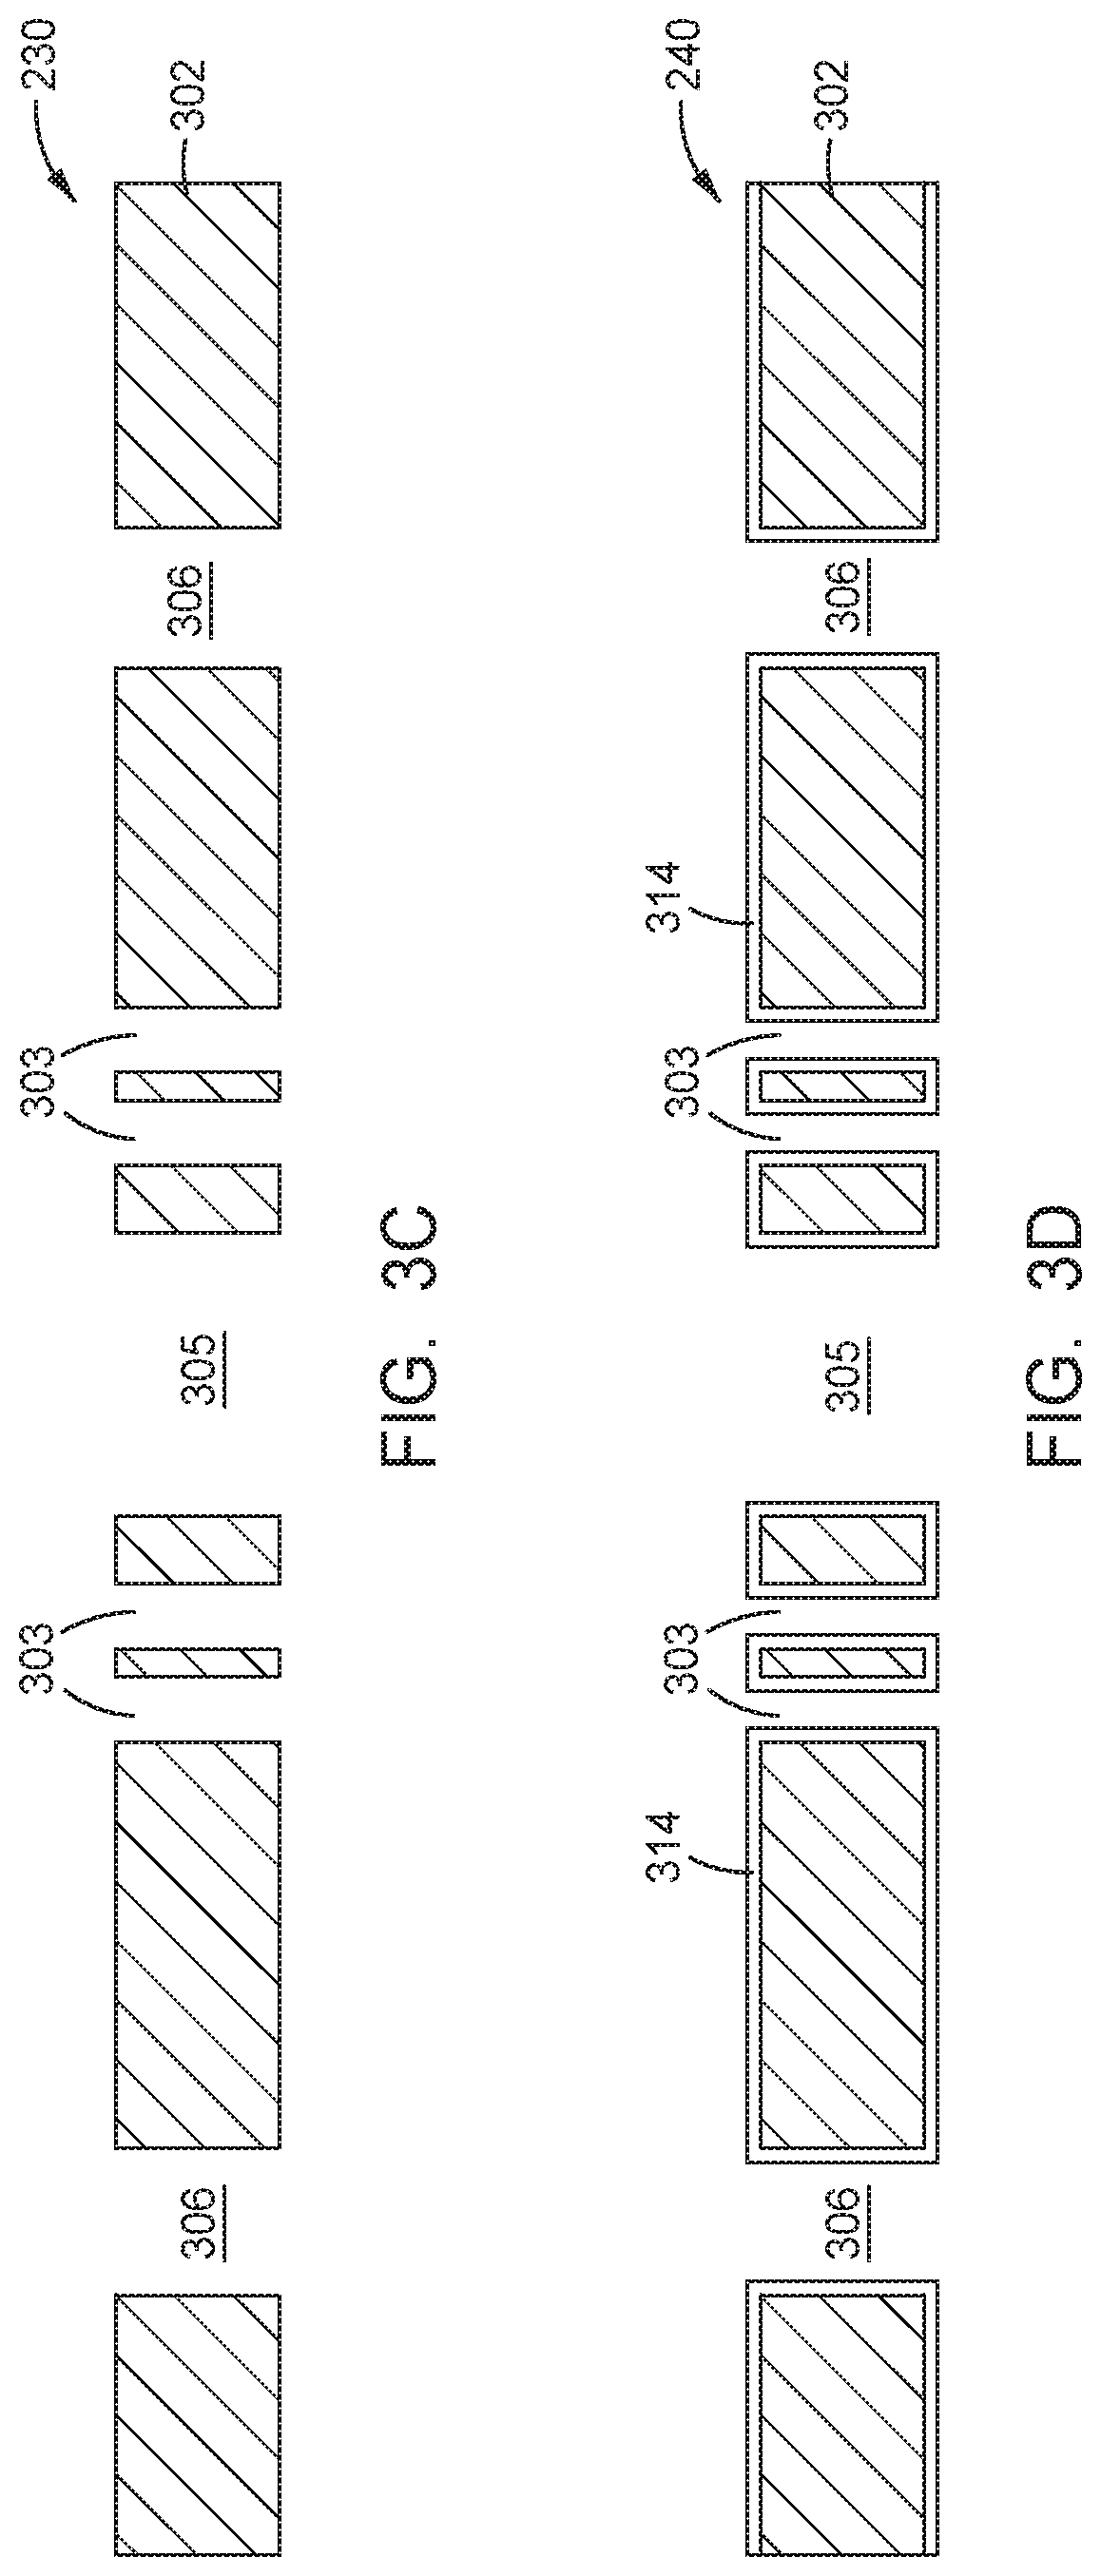 Reconstituted substrate for radio frequency applications